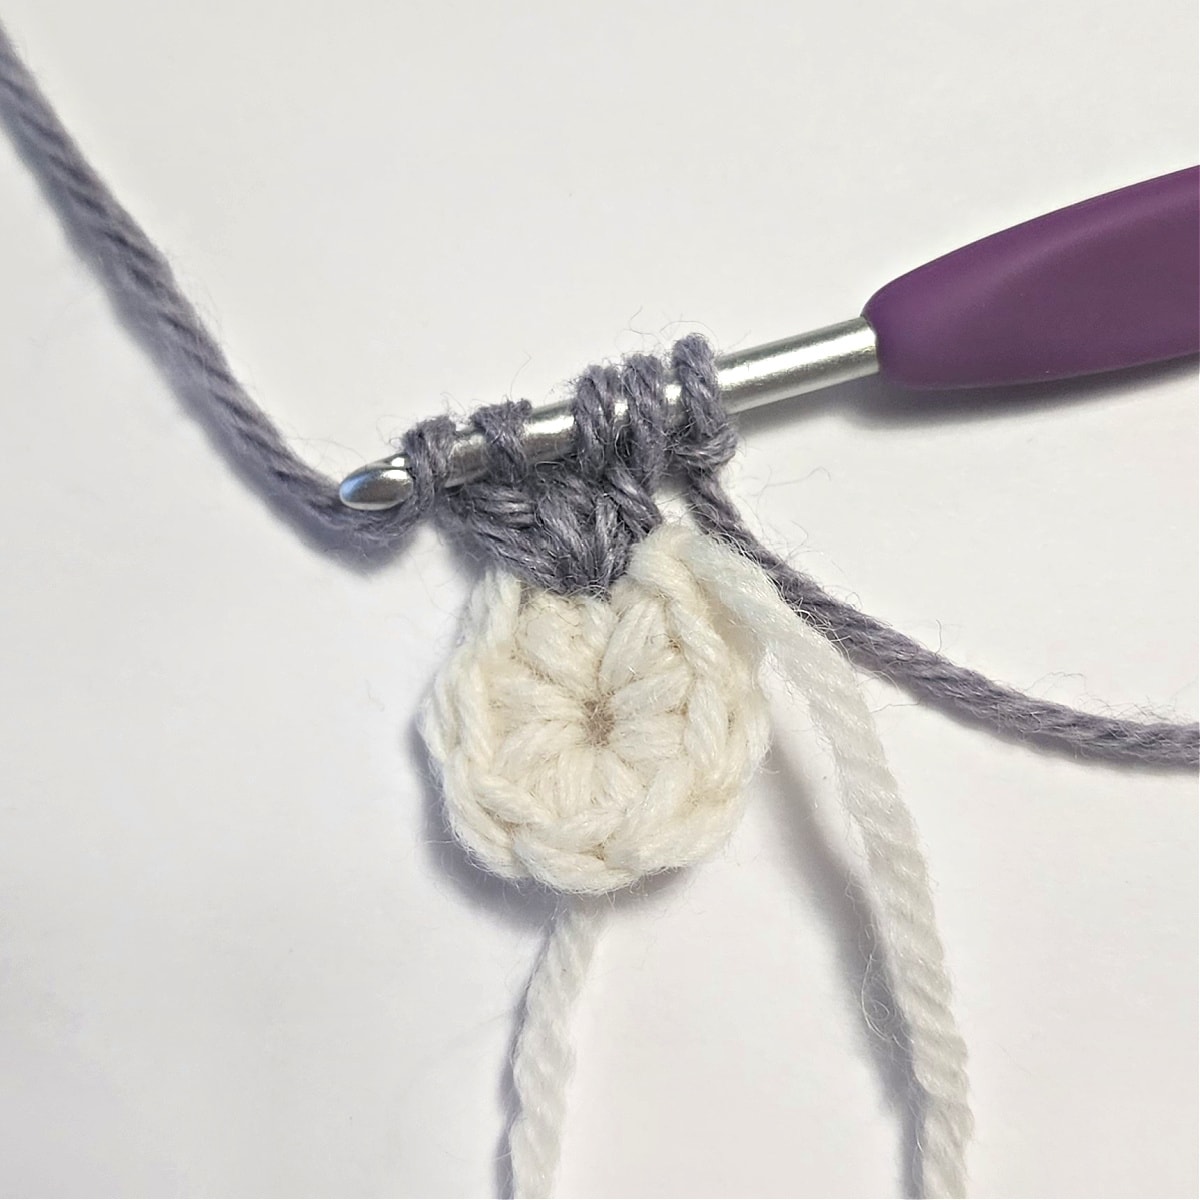 Small crochet swatch with a purple crochet hook and cluster stitch being worked.